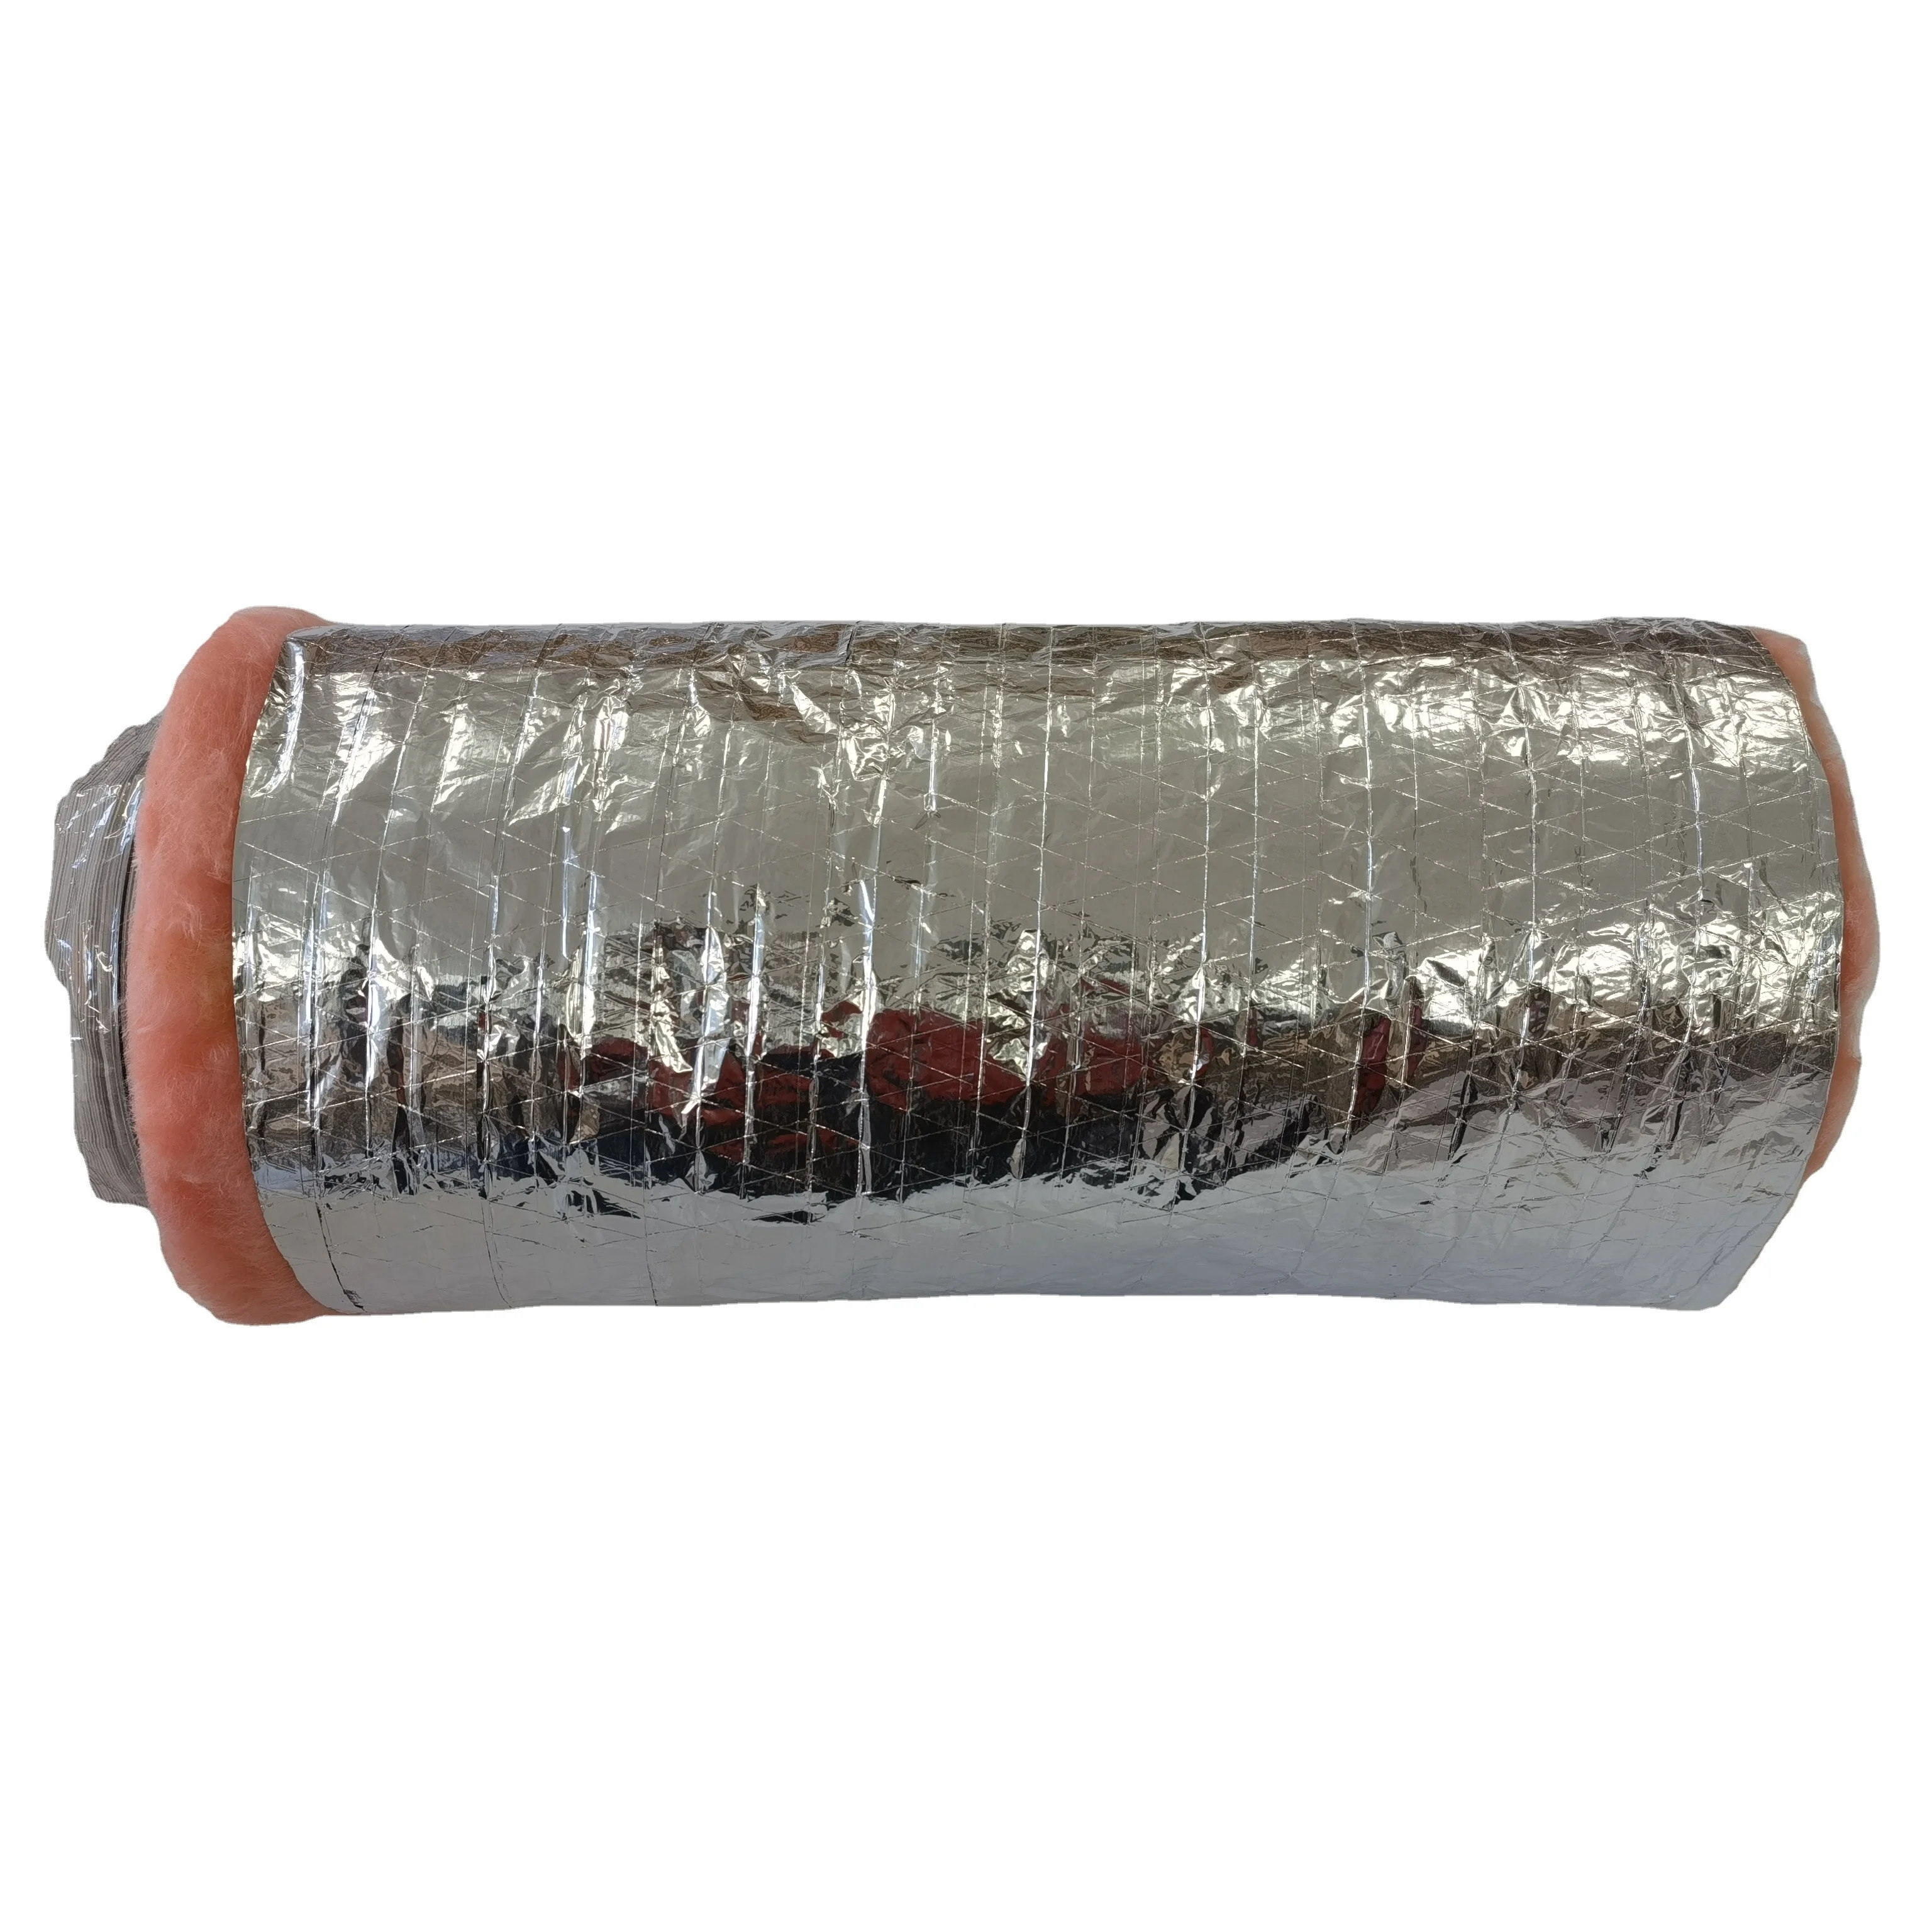 R6 R8 aluminum foil flexible duct for HVAC Insulated duct with Heat Resistance 1 YEAR  Online Technical Support (1600276514943)